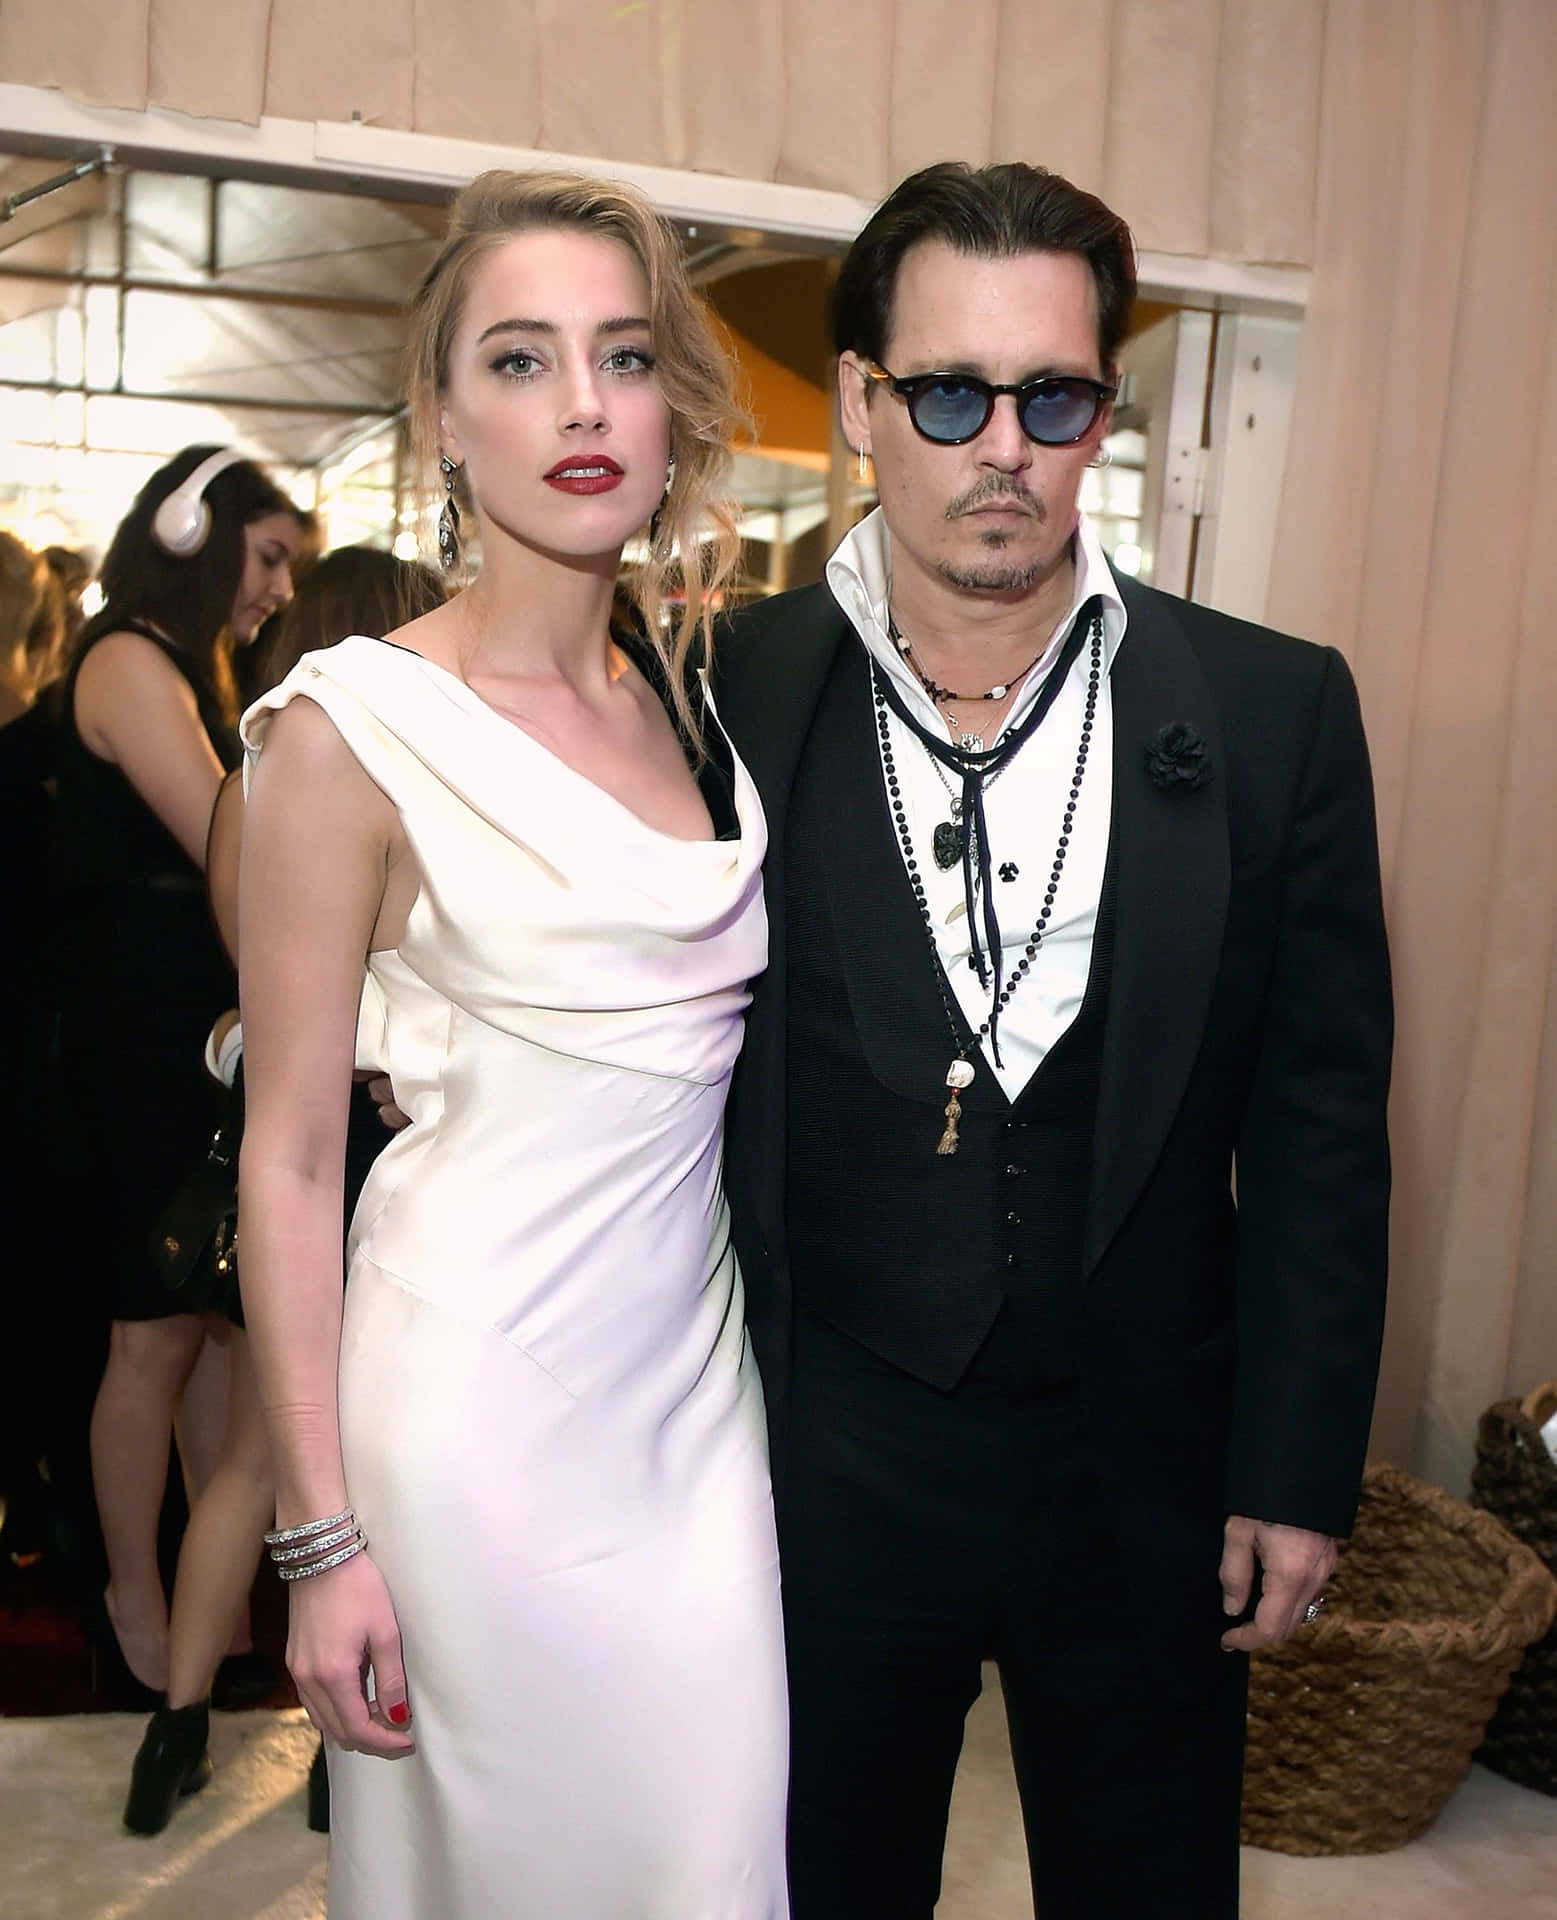 Johnny Depp and Amber Heard on the red carpet